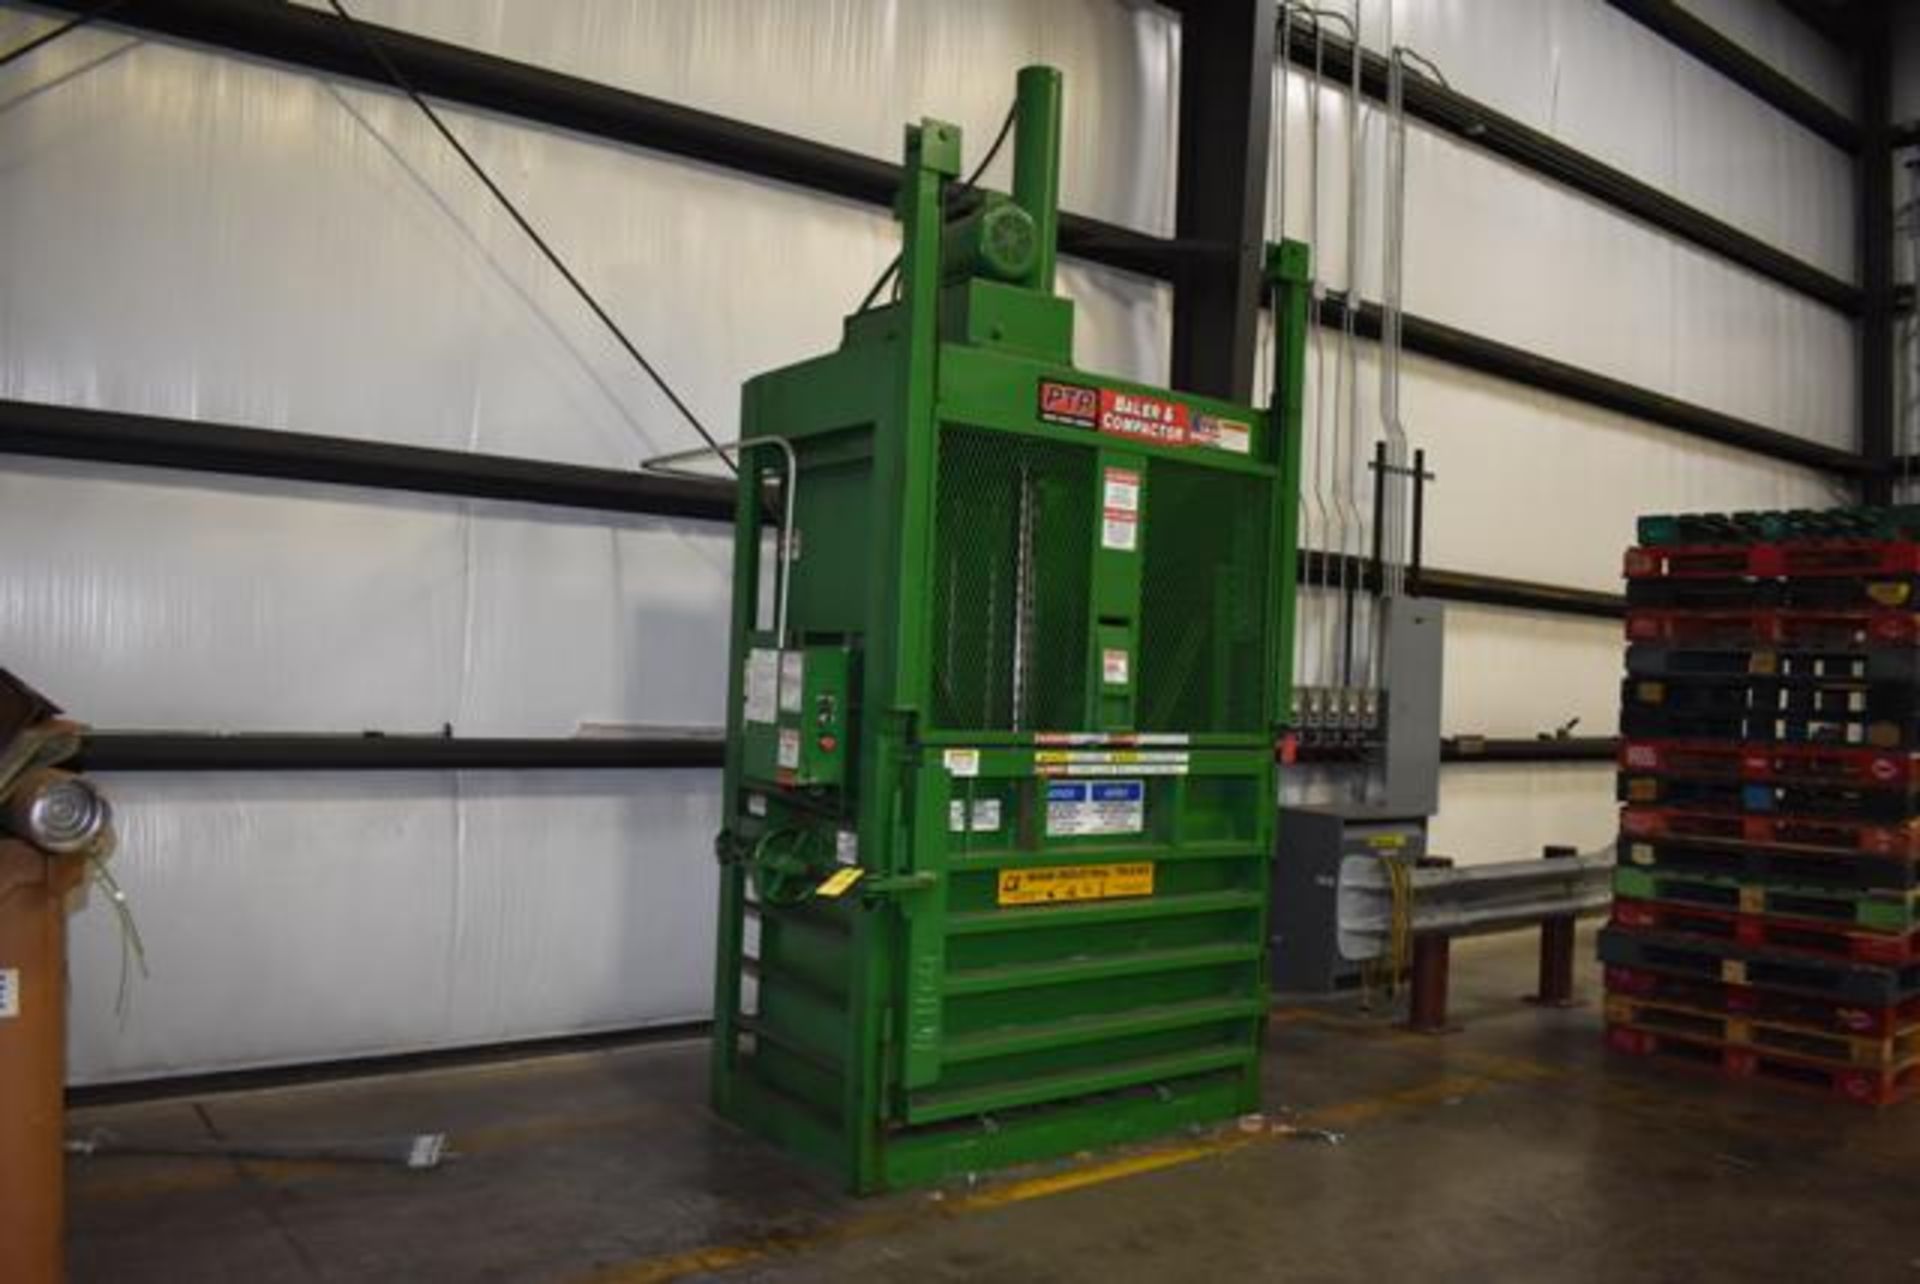 ( Late Delivery Item Expected Availability Mid May) PTR Baler Model #S-400, Approx. 10 HP Motor